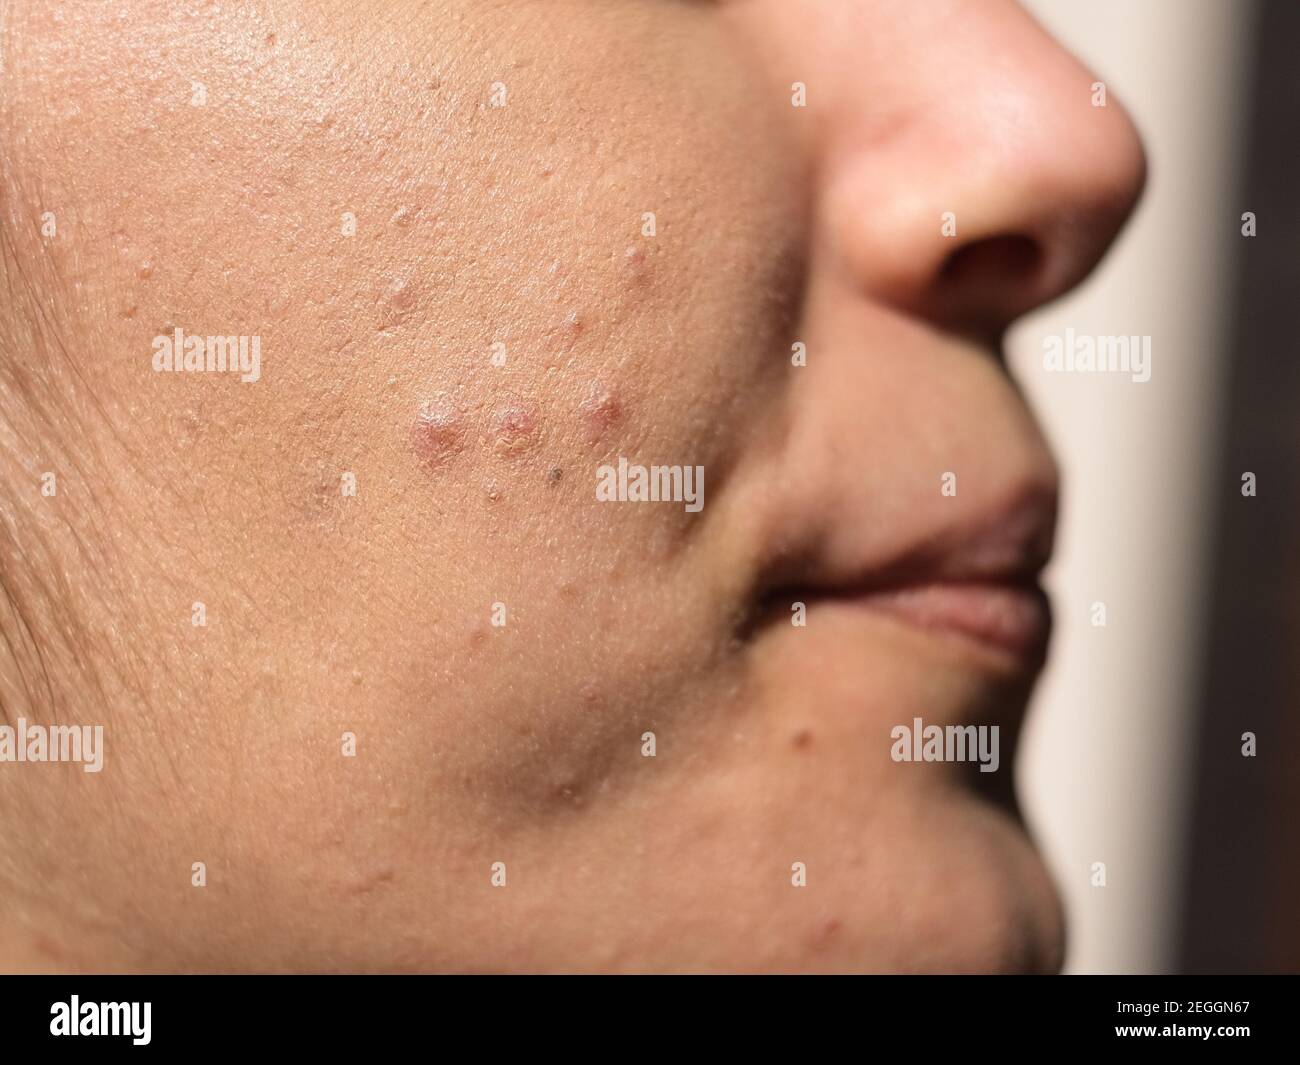 Young woman with skin acne face close up view,dermatological hormone disease Stock Photo